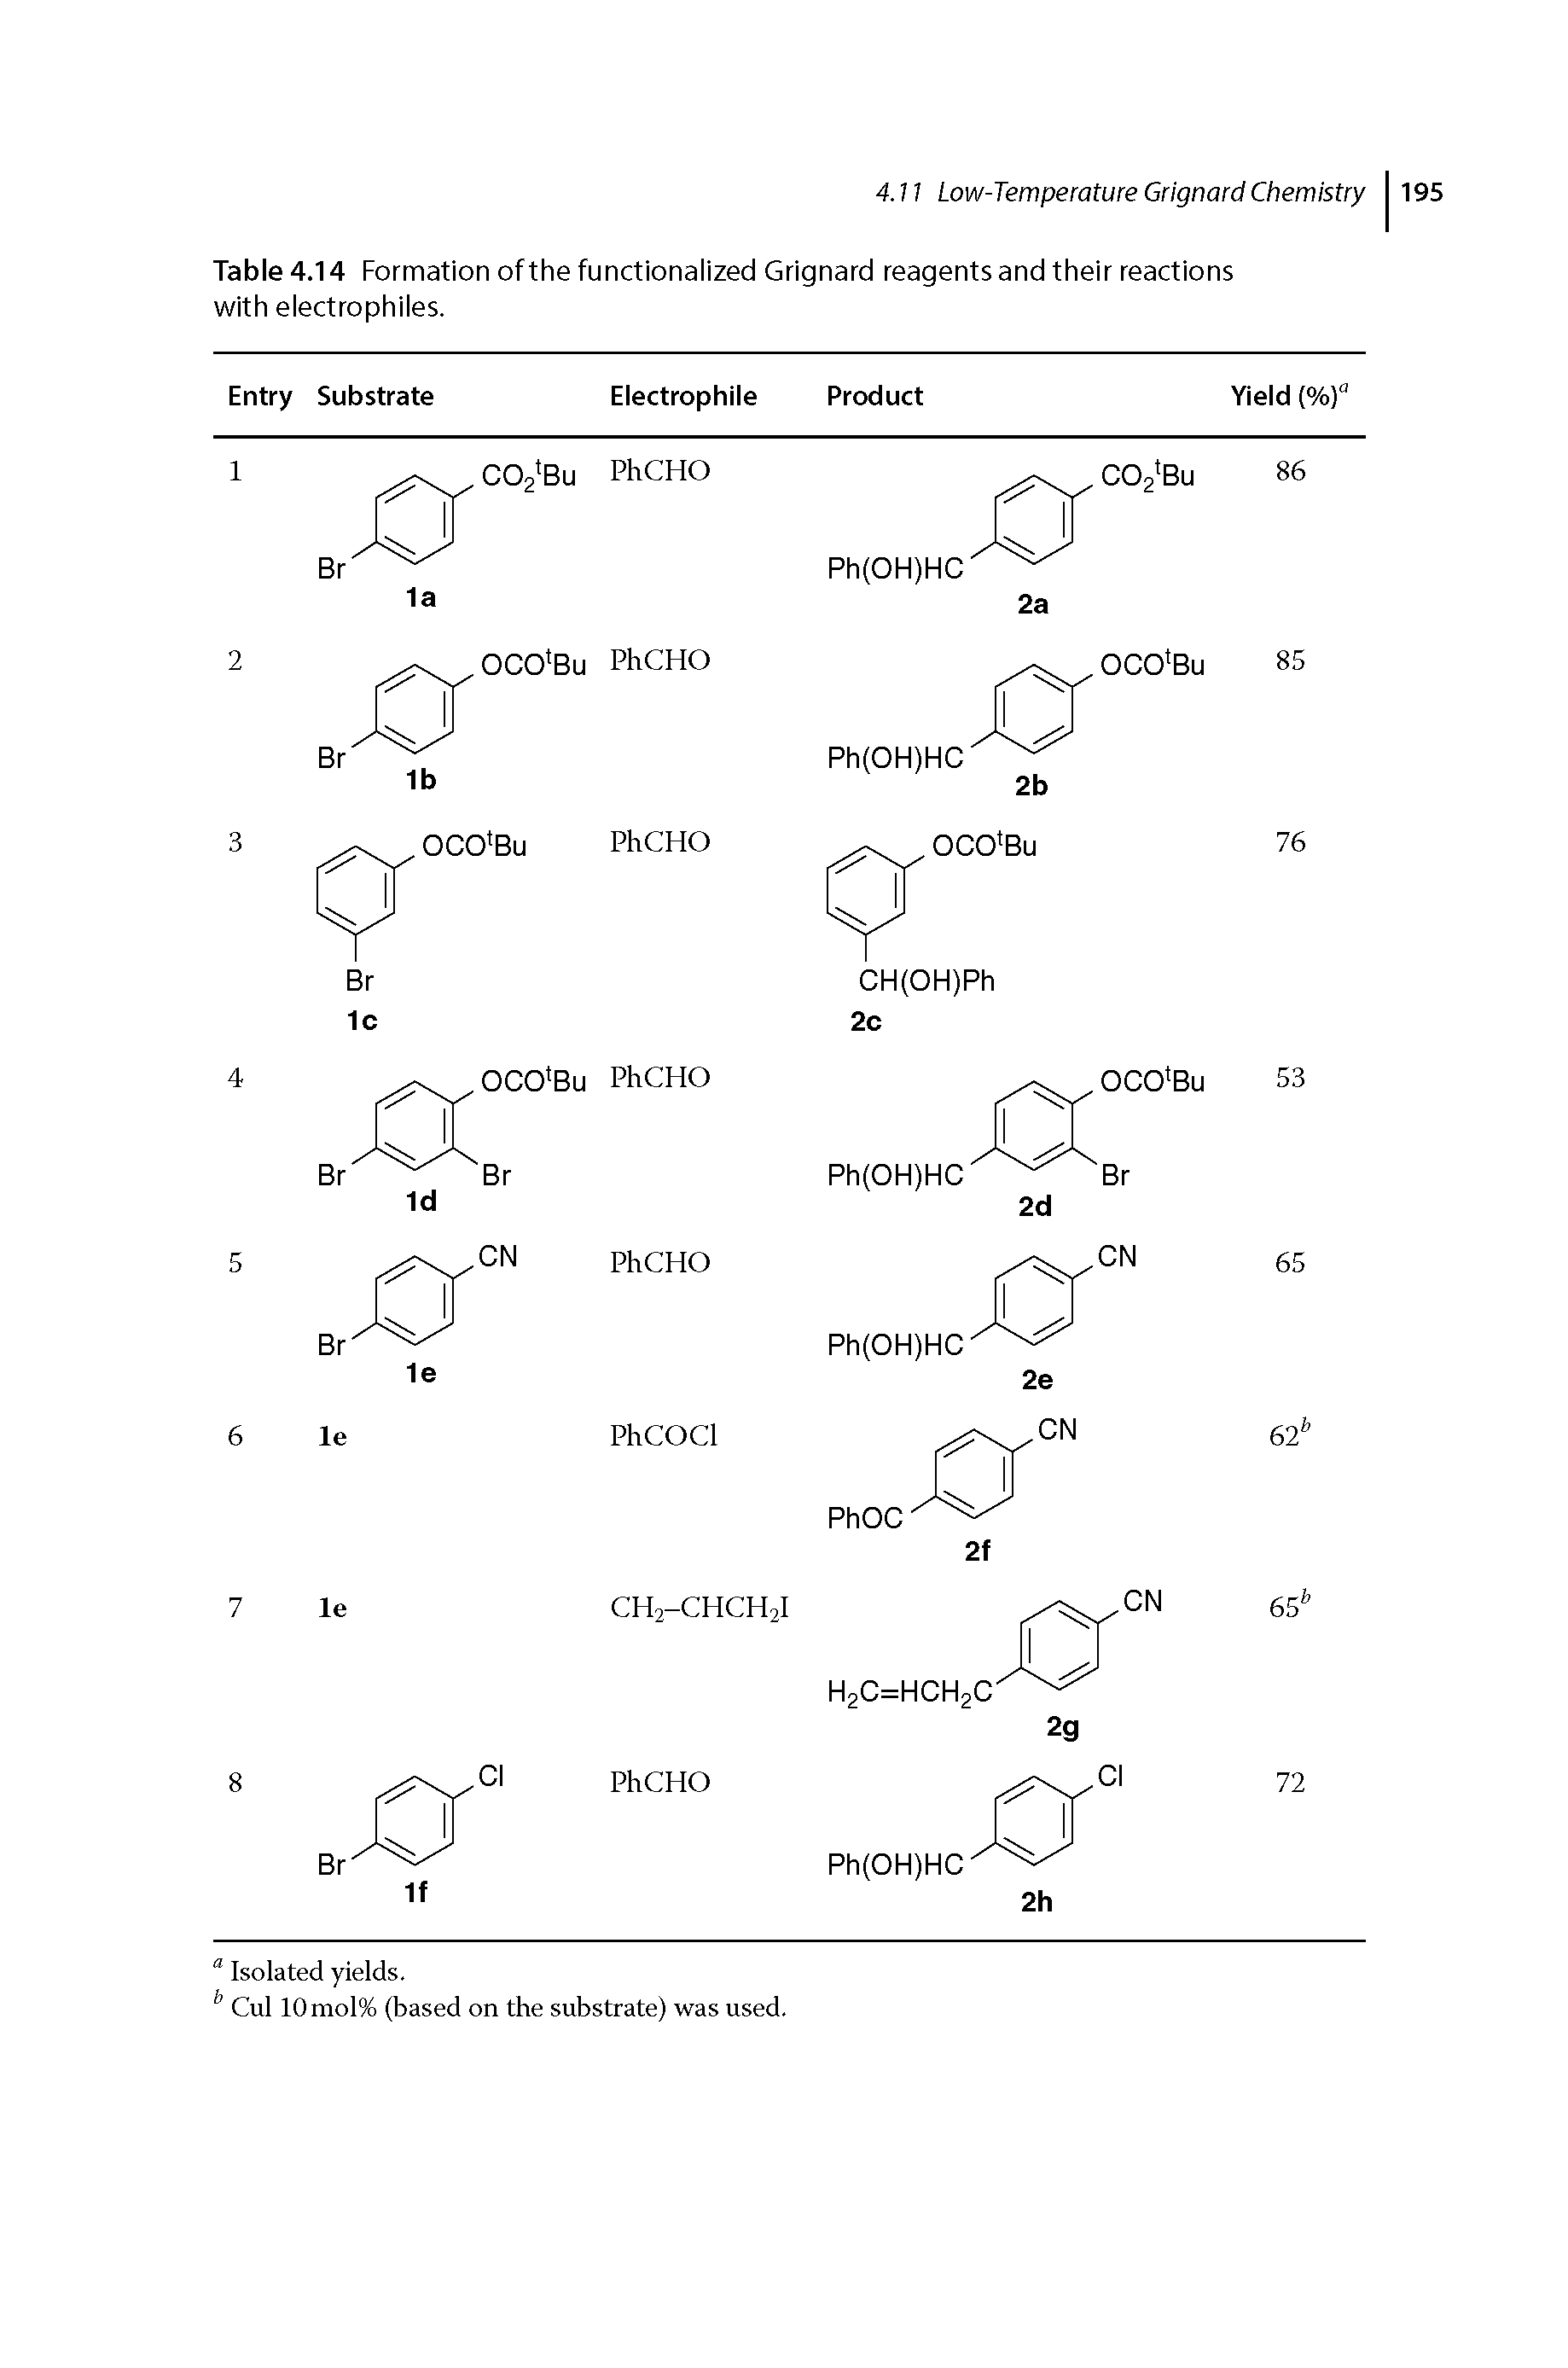 Table 4.14 Formation of the functionalized Grignard reagents and their reactions with electrophiles.